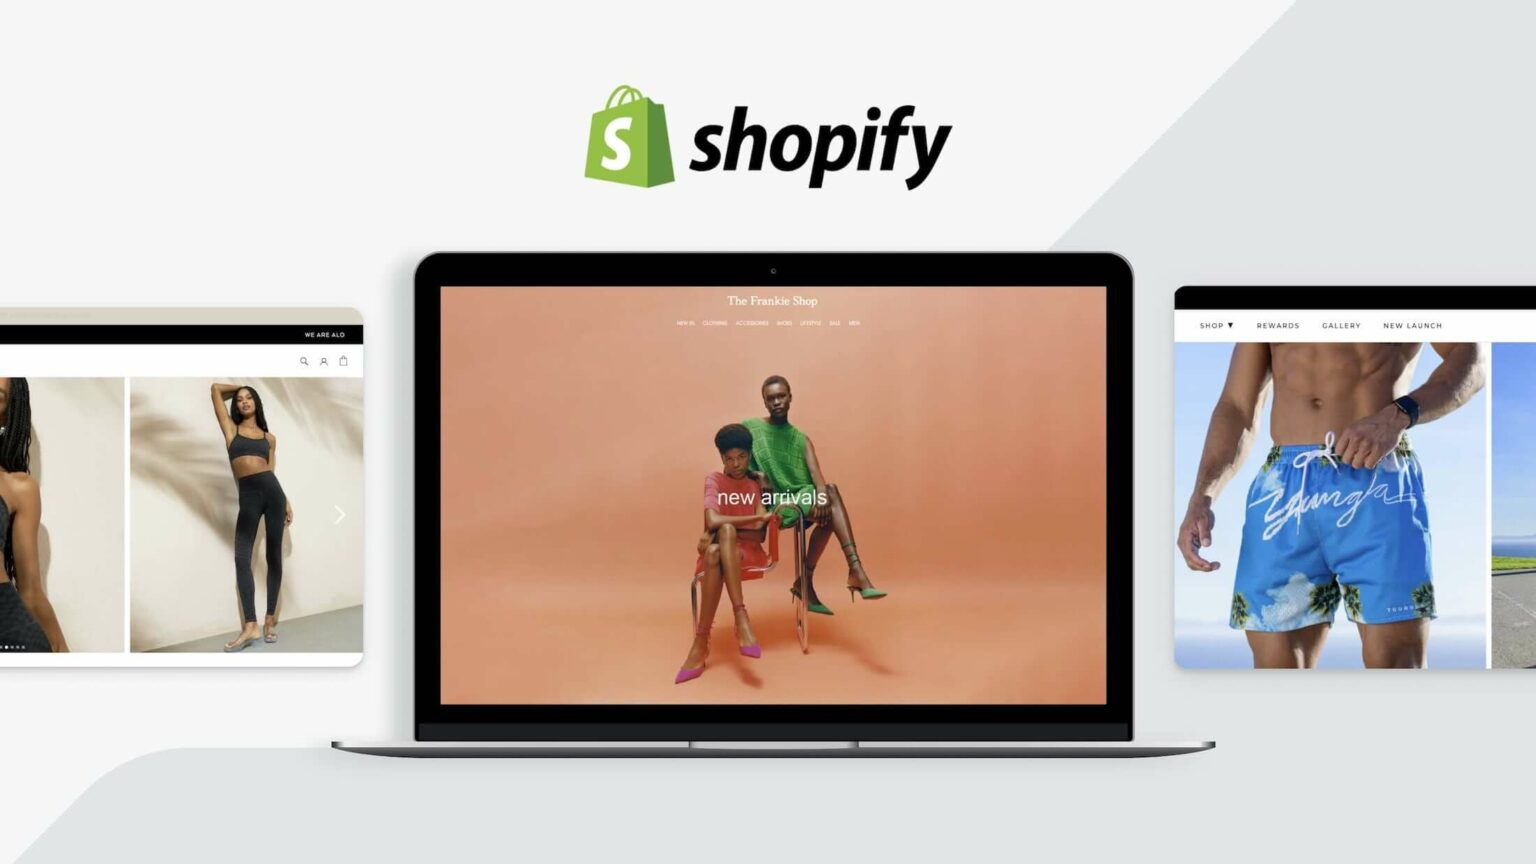 What are the Shopify Clothing Stores?